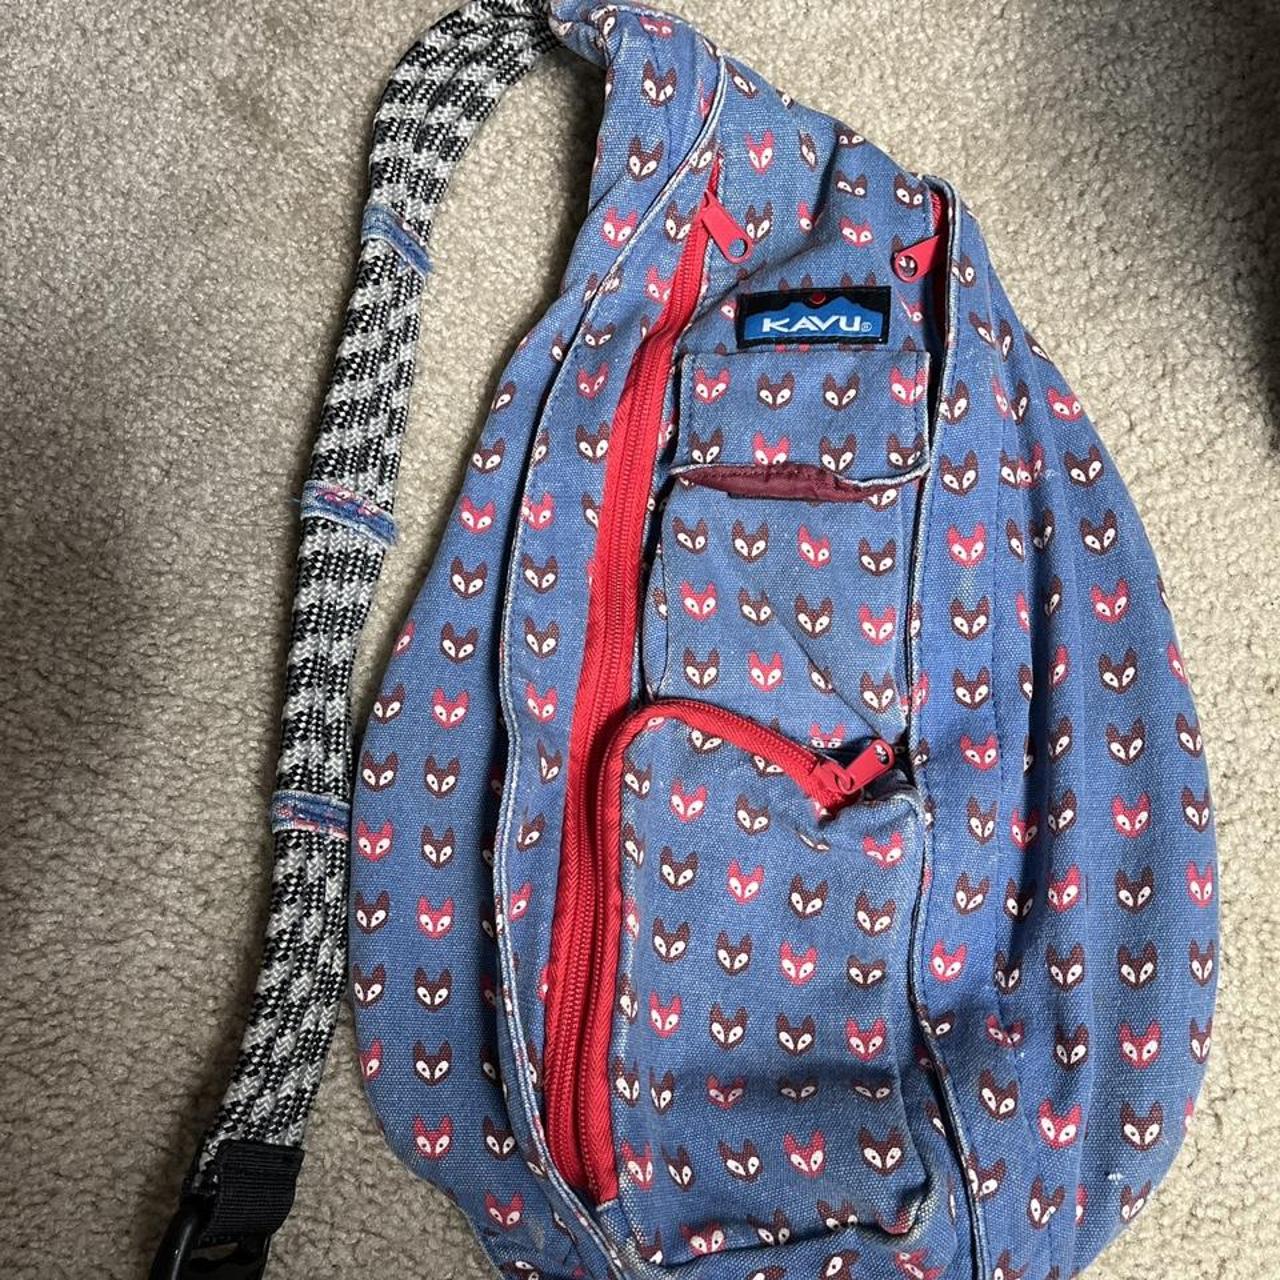 Kavu Fox Trot Rope Bag Rare and Hard to Find - Depop